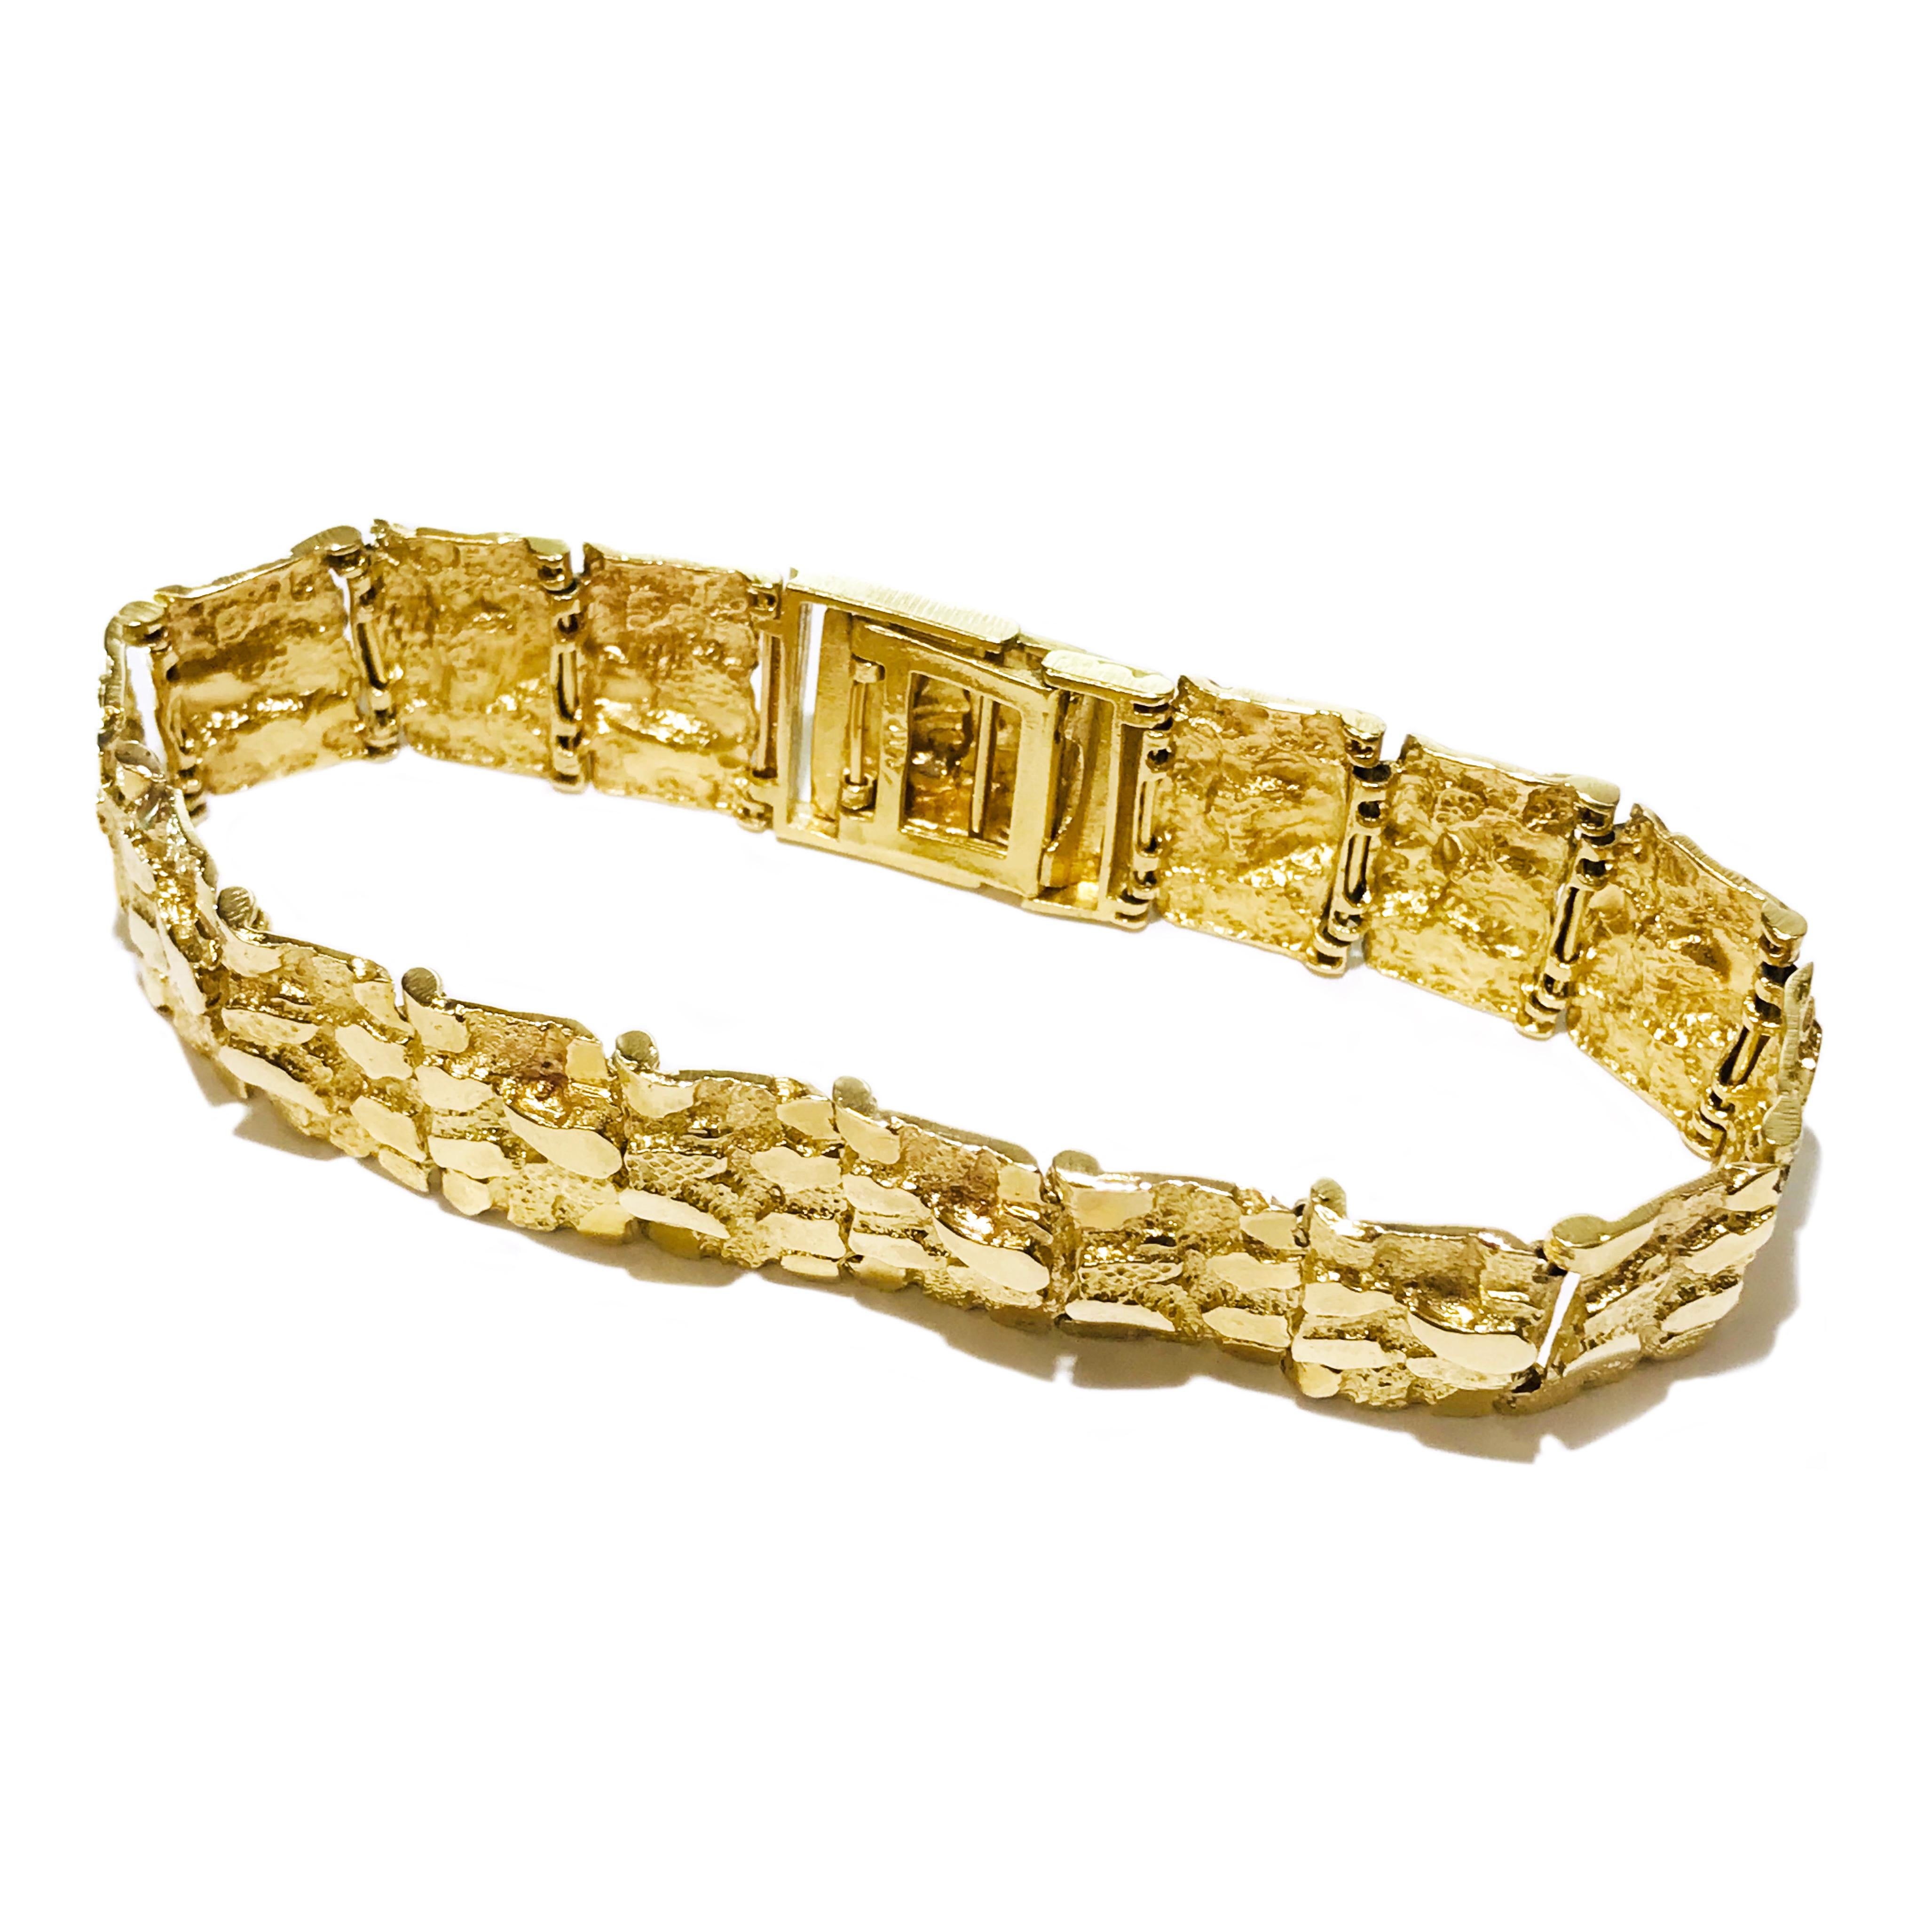 14 Karat Gold Nugget Bracelet, 18mm wide. The retro look is making a comeback, sixteen nugget textured links make up this wide bracelet. Stamped on the inside of the clasp is 14KP. The bracelet is 8.5